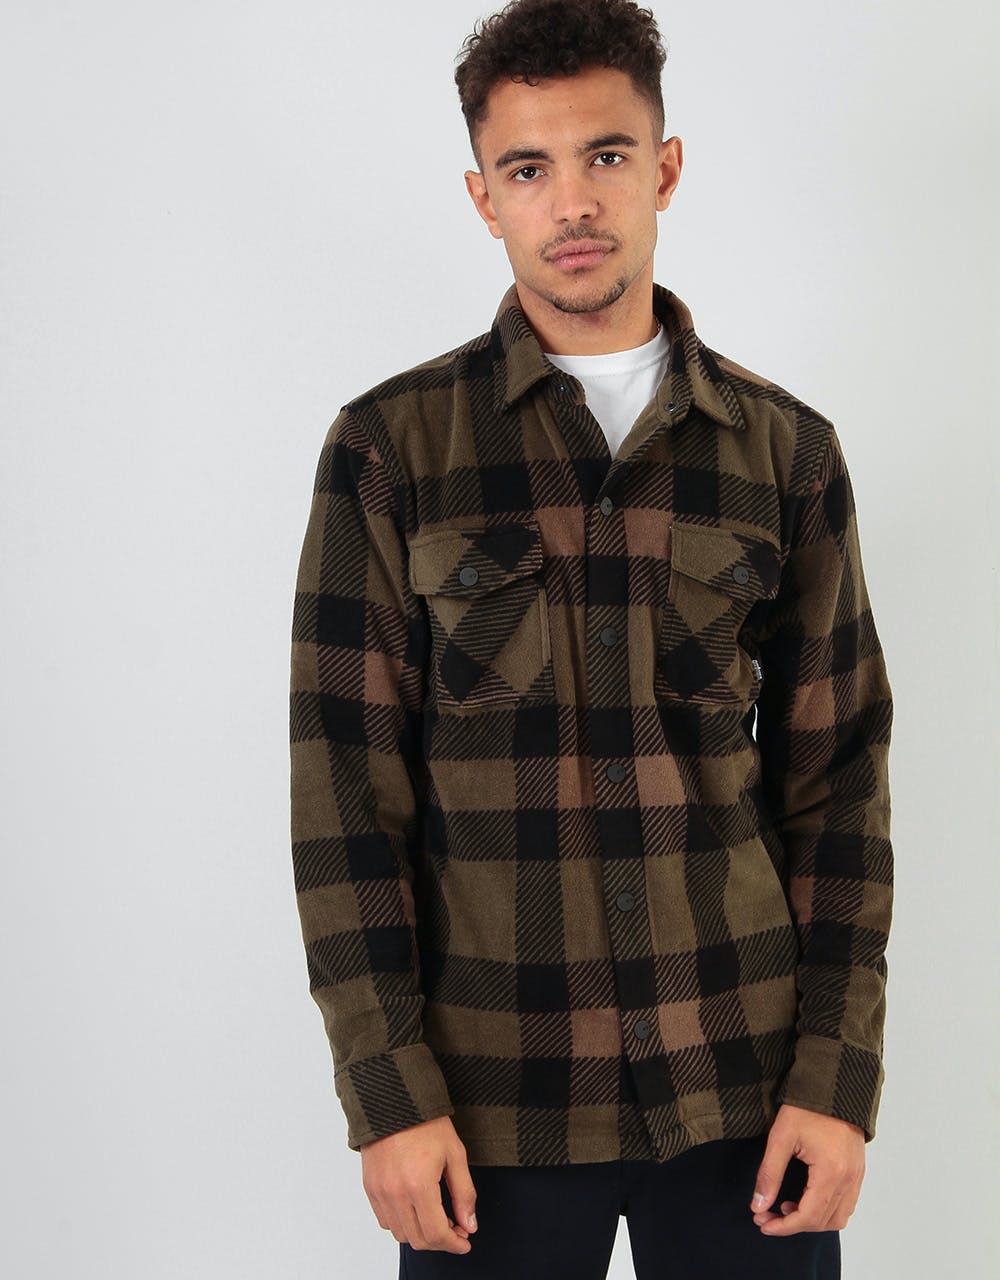 ThirtyTwo Rest Stop L/S Fleece Shirt - Army